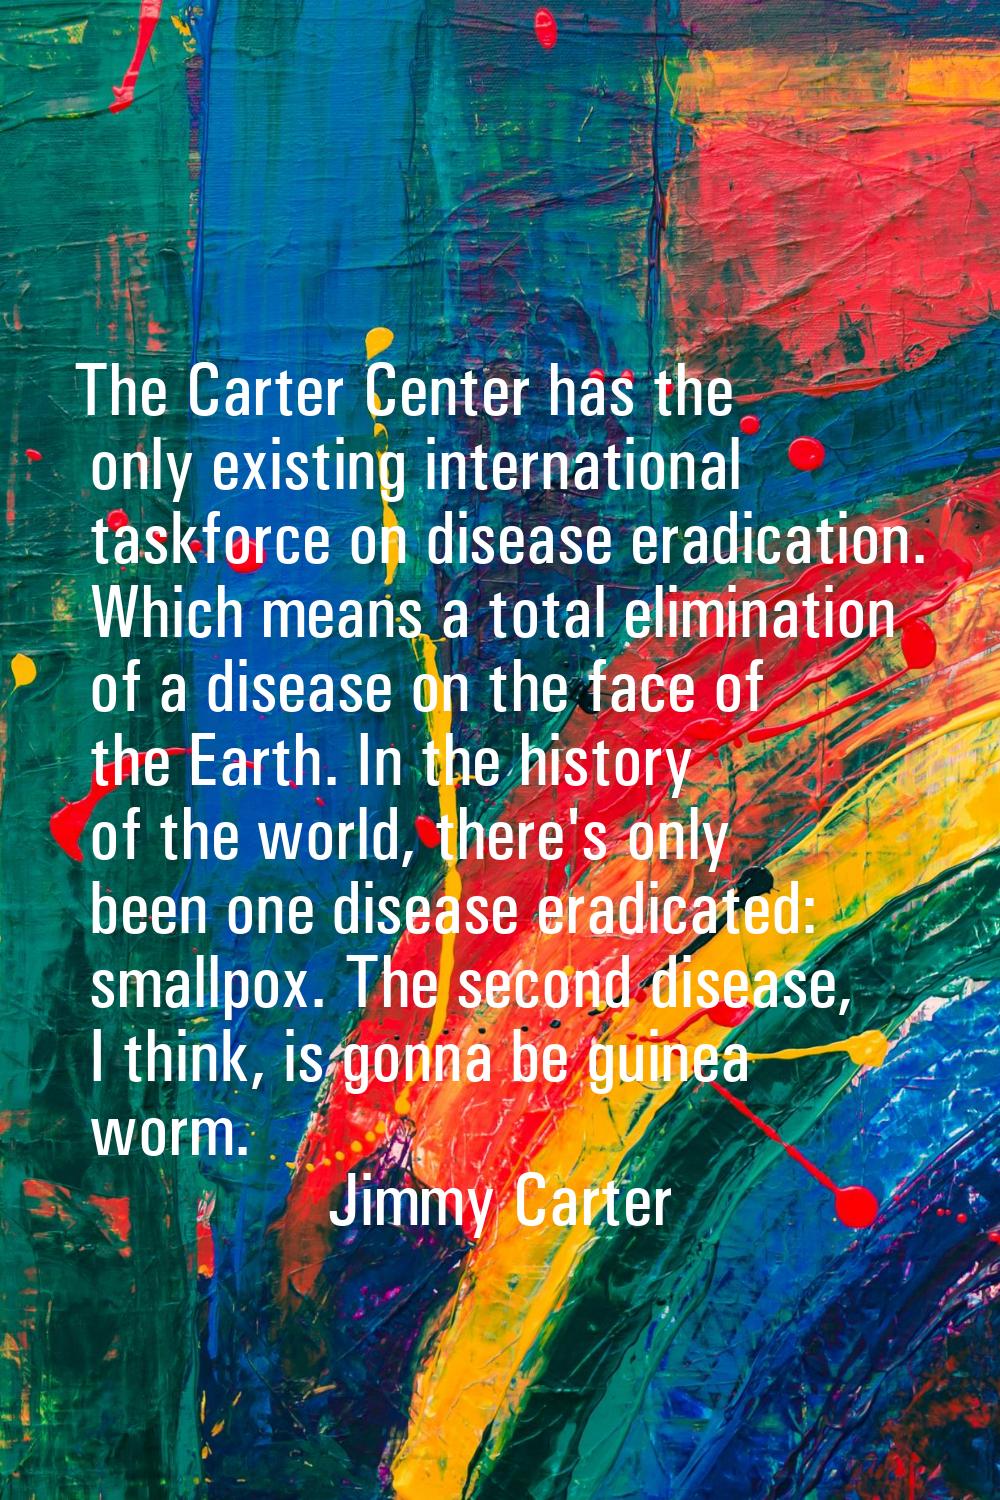 The Carter Center has the only existing international taskforce on disease eradication. Which means